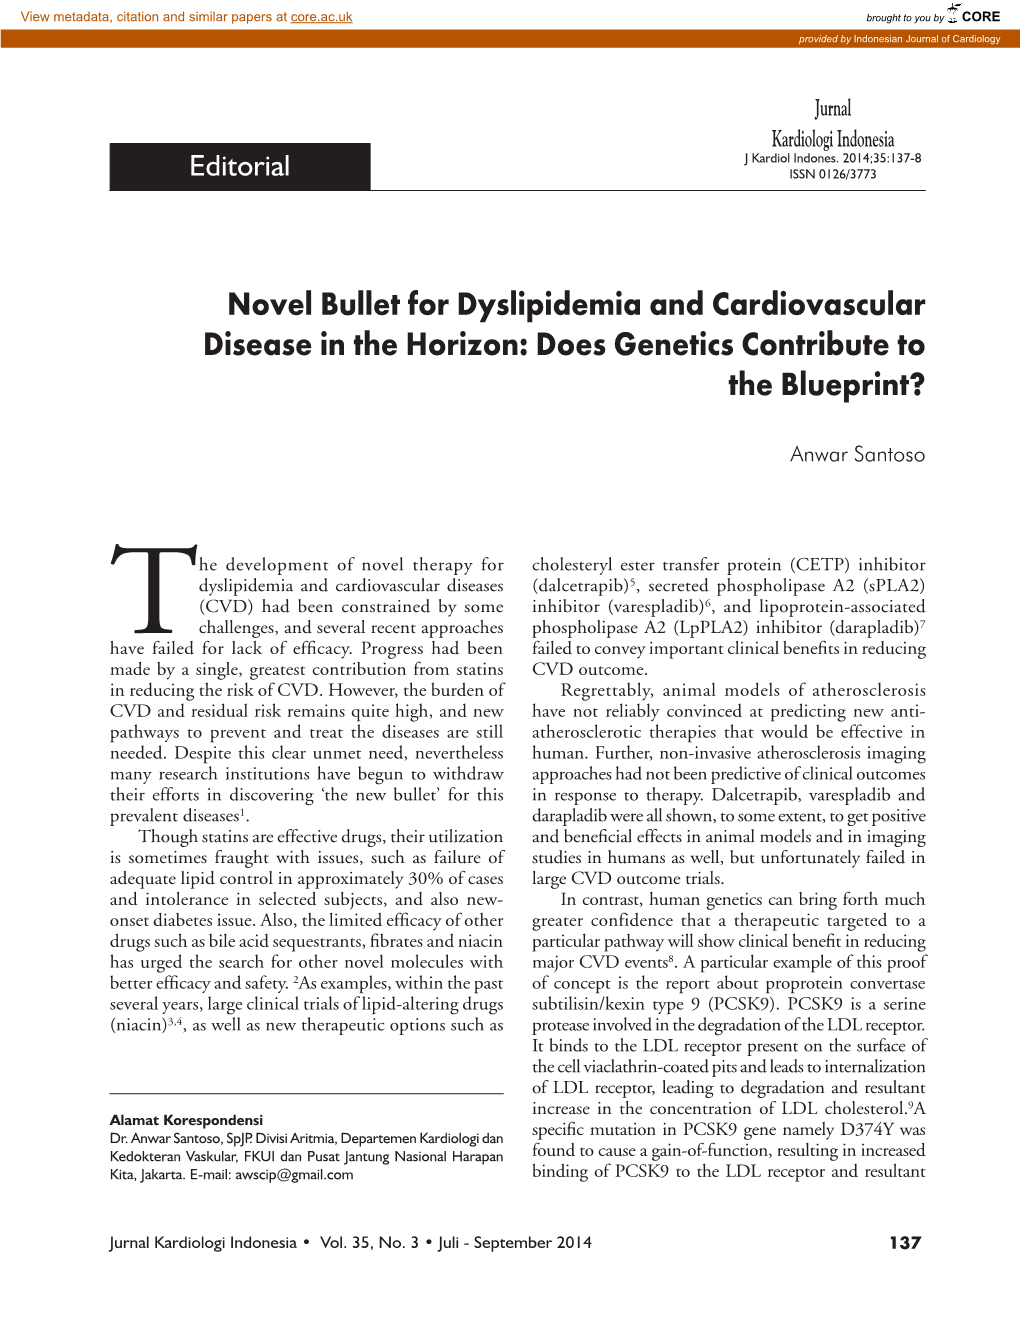 Novel Bullet for Dyslipidemia and Cardiovascular Disease in the Horizon: Does Genetics Contribute to the Blueprint?